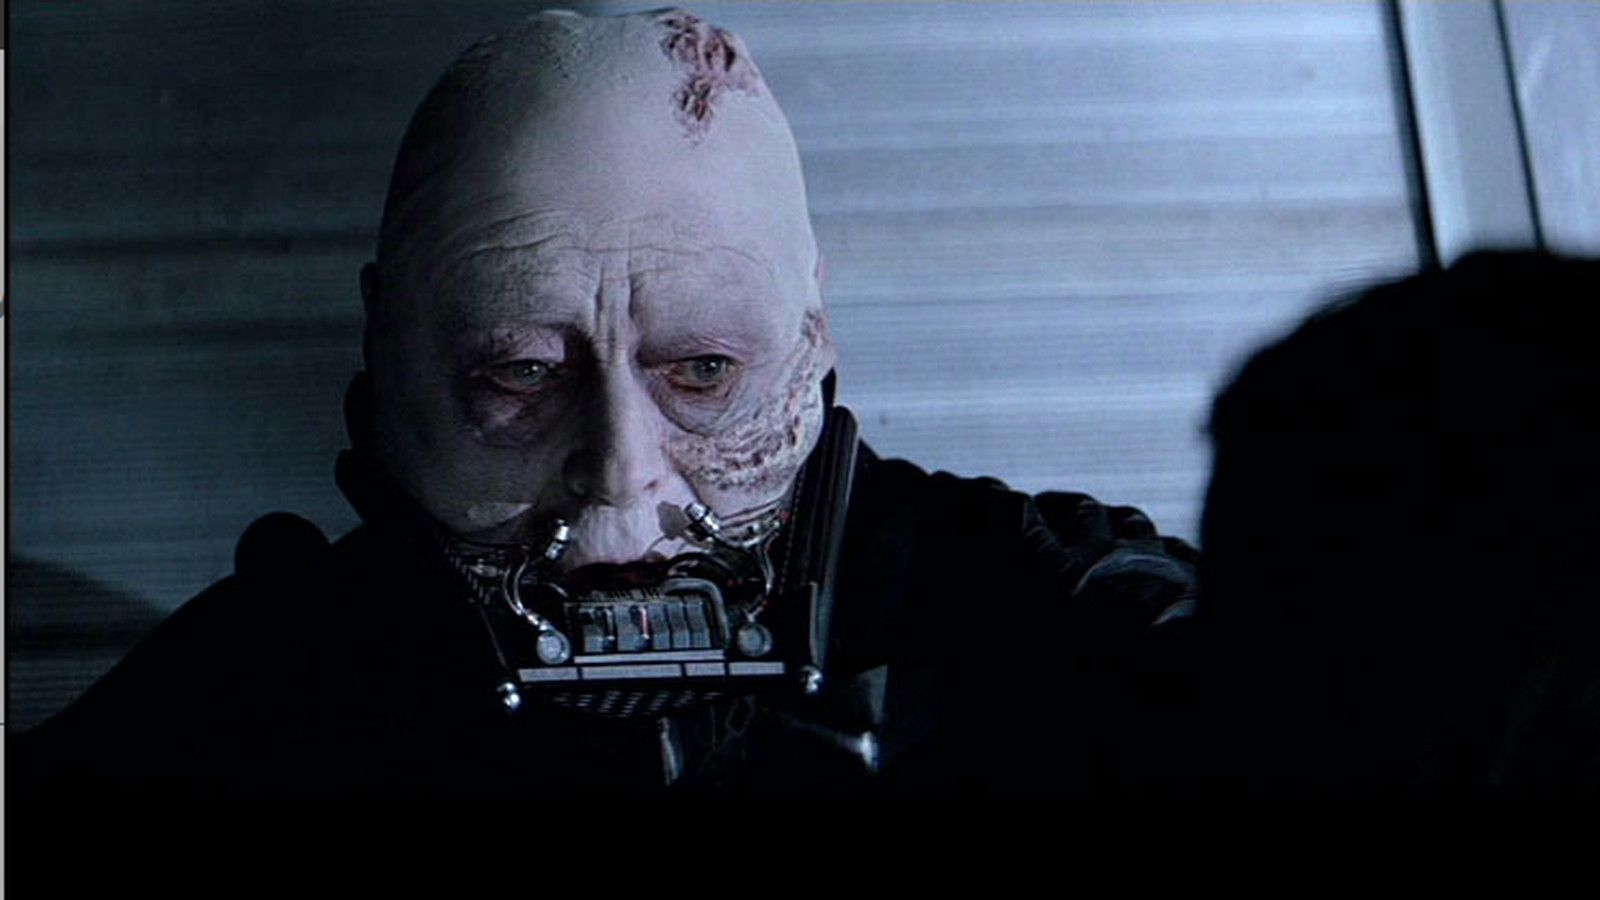 How movie villains are teaching us skin conditions are evil